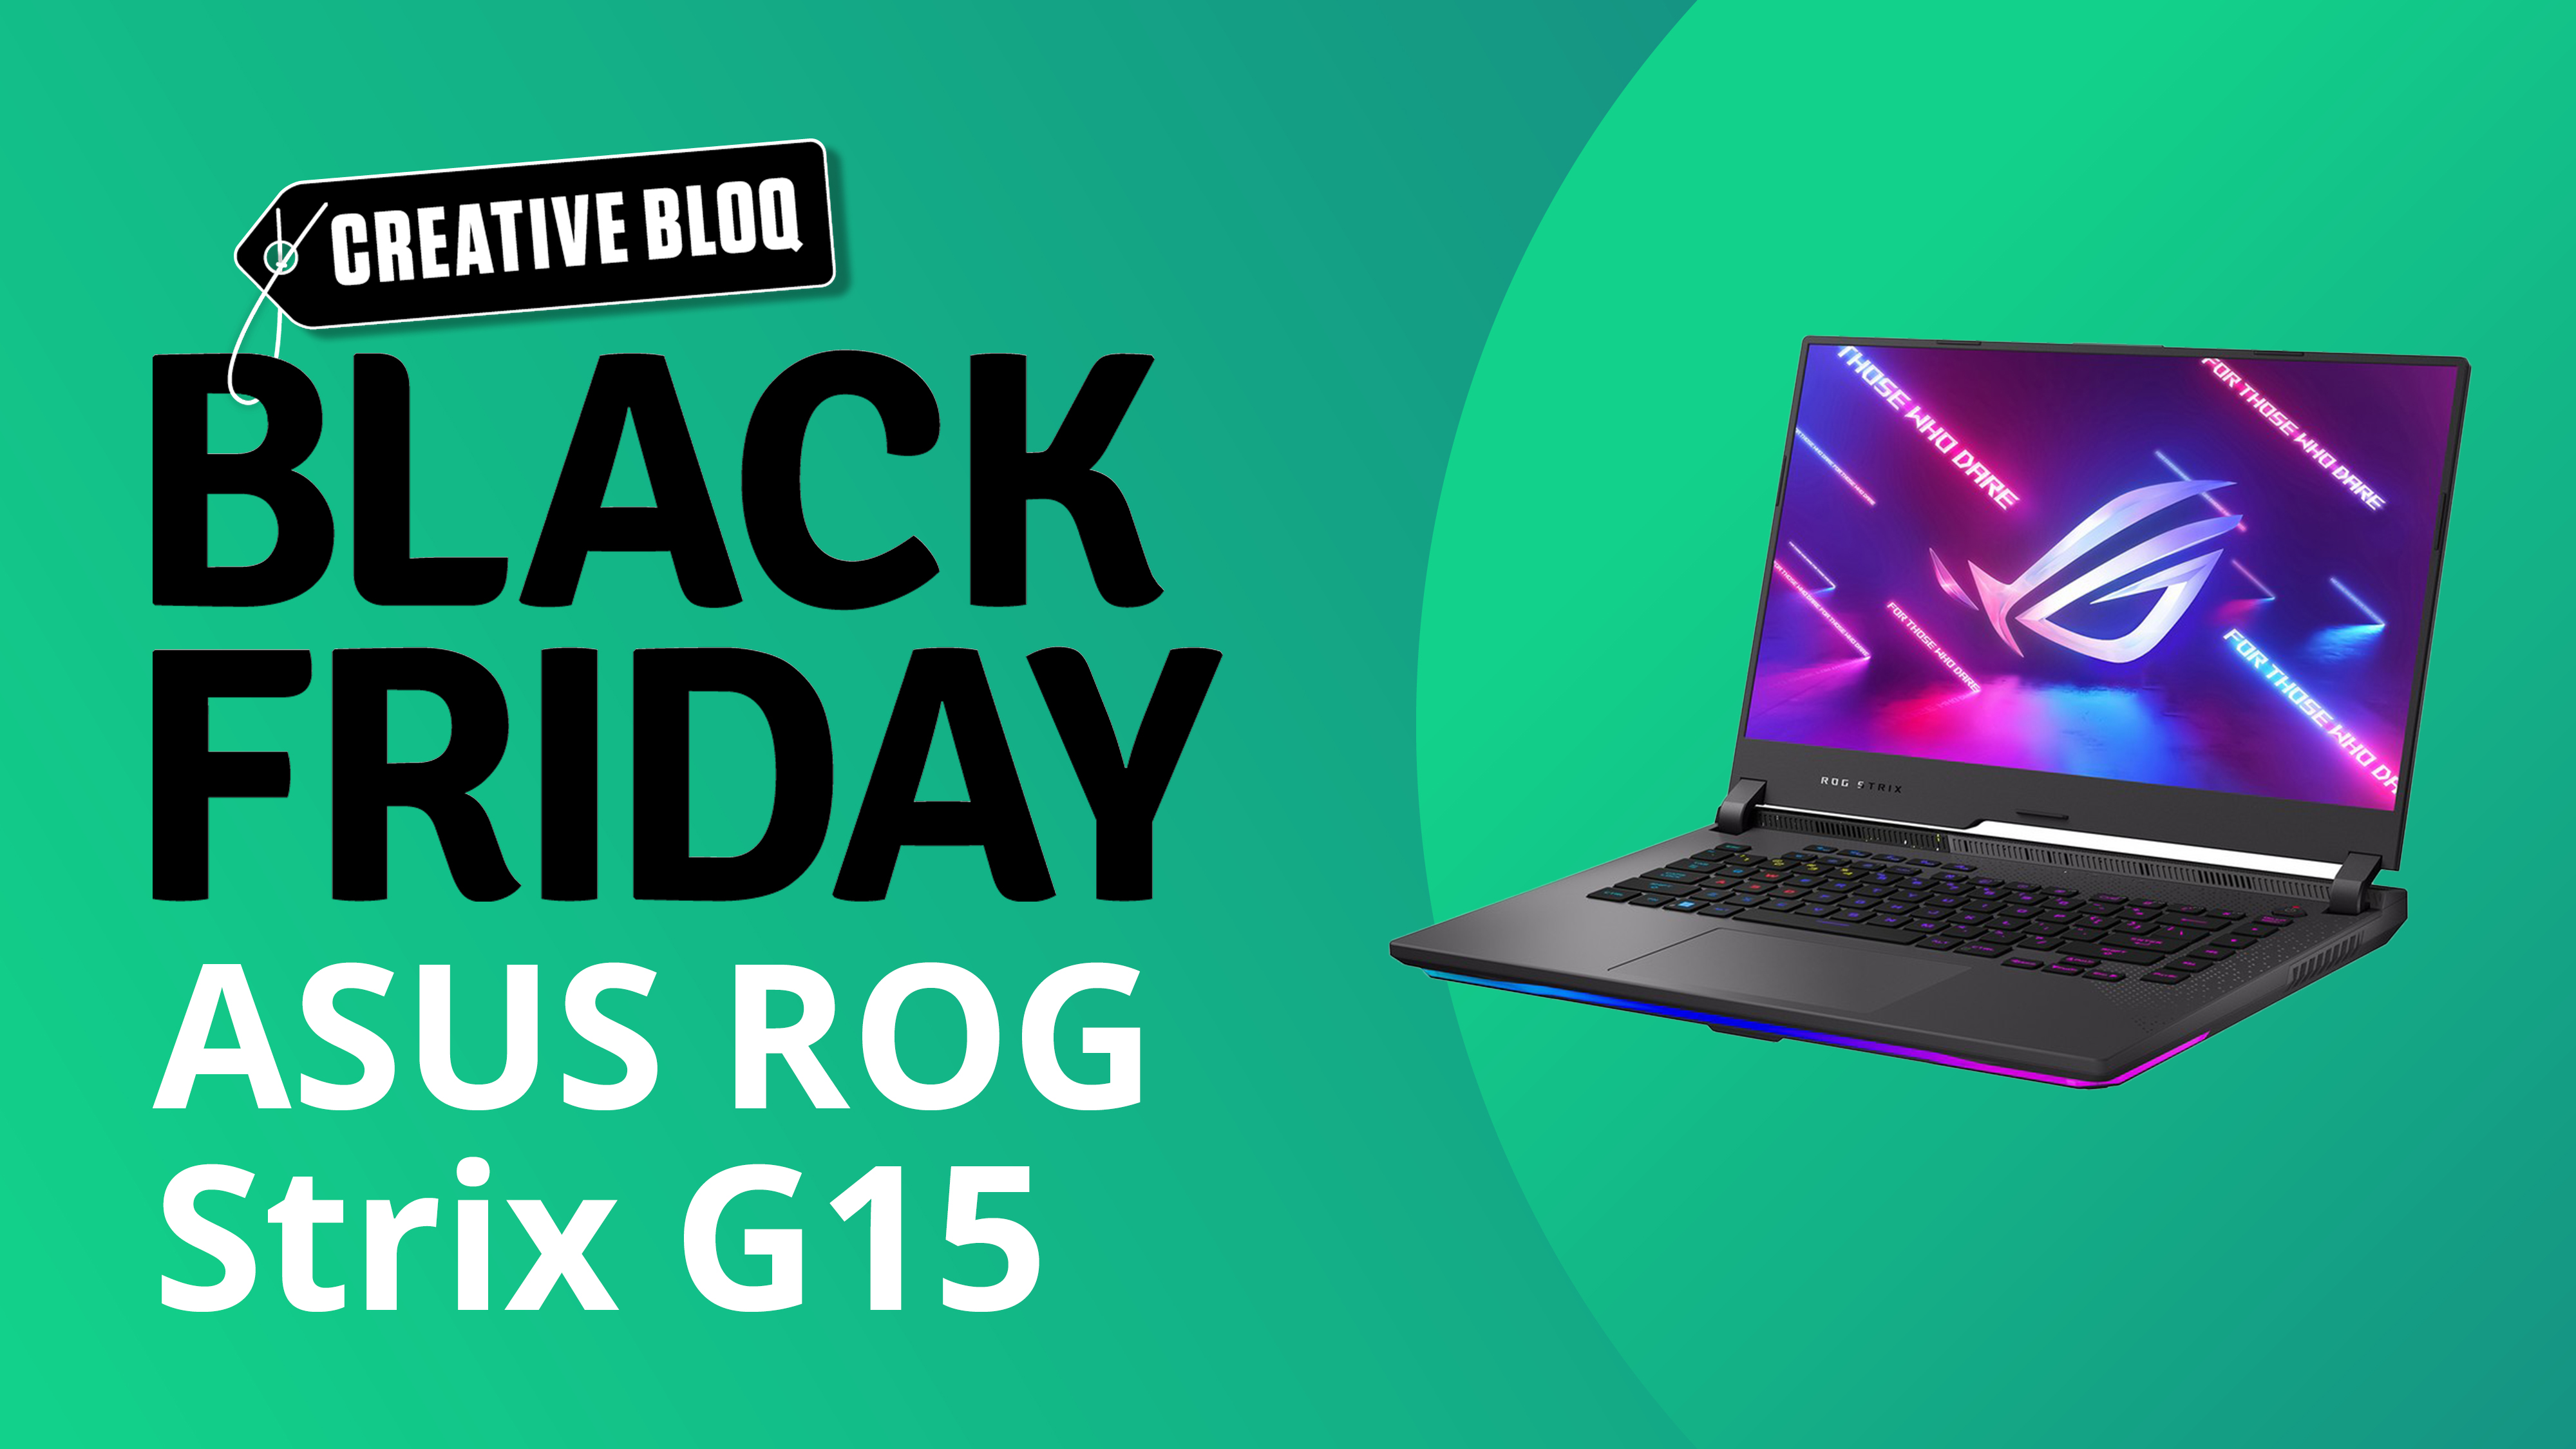 An image of an ASUS ROG Strix G15 next to the text Creative Bloq Black Friday: ASUS ROG Strix G15 on a green background